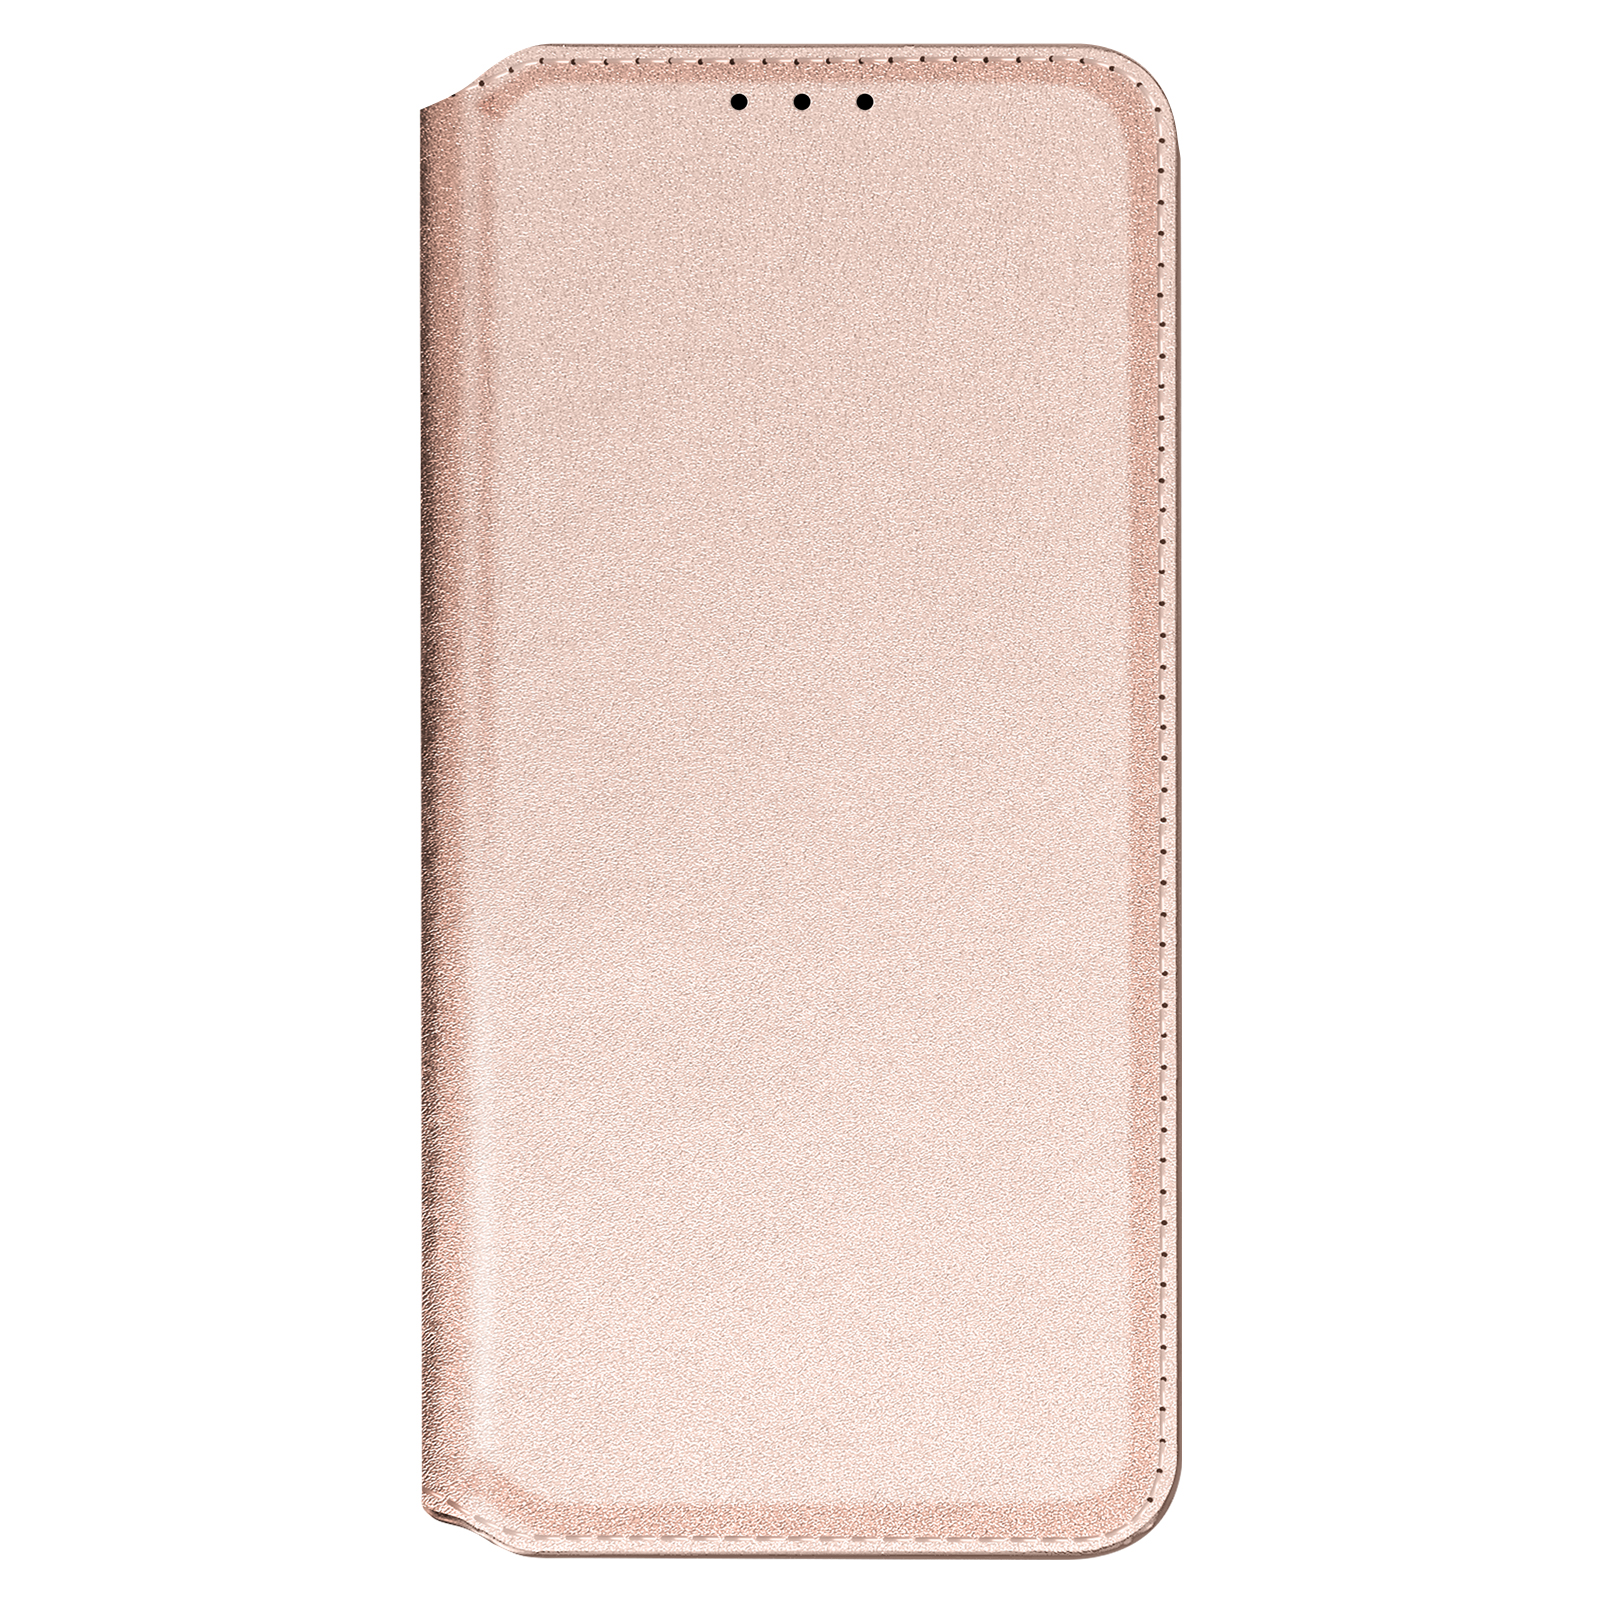 mit Series, Classic Bookcover, Edition, Backcover Rosegold Wiko, Wiko AVIZAR Magnetklappe Y81,